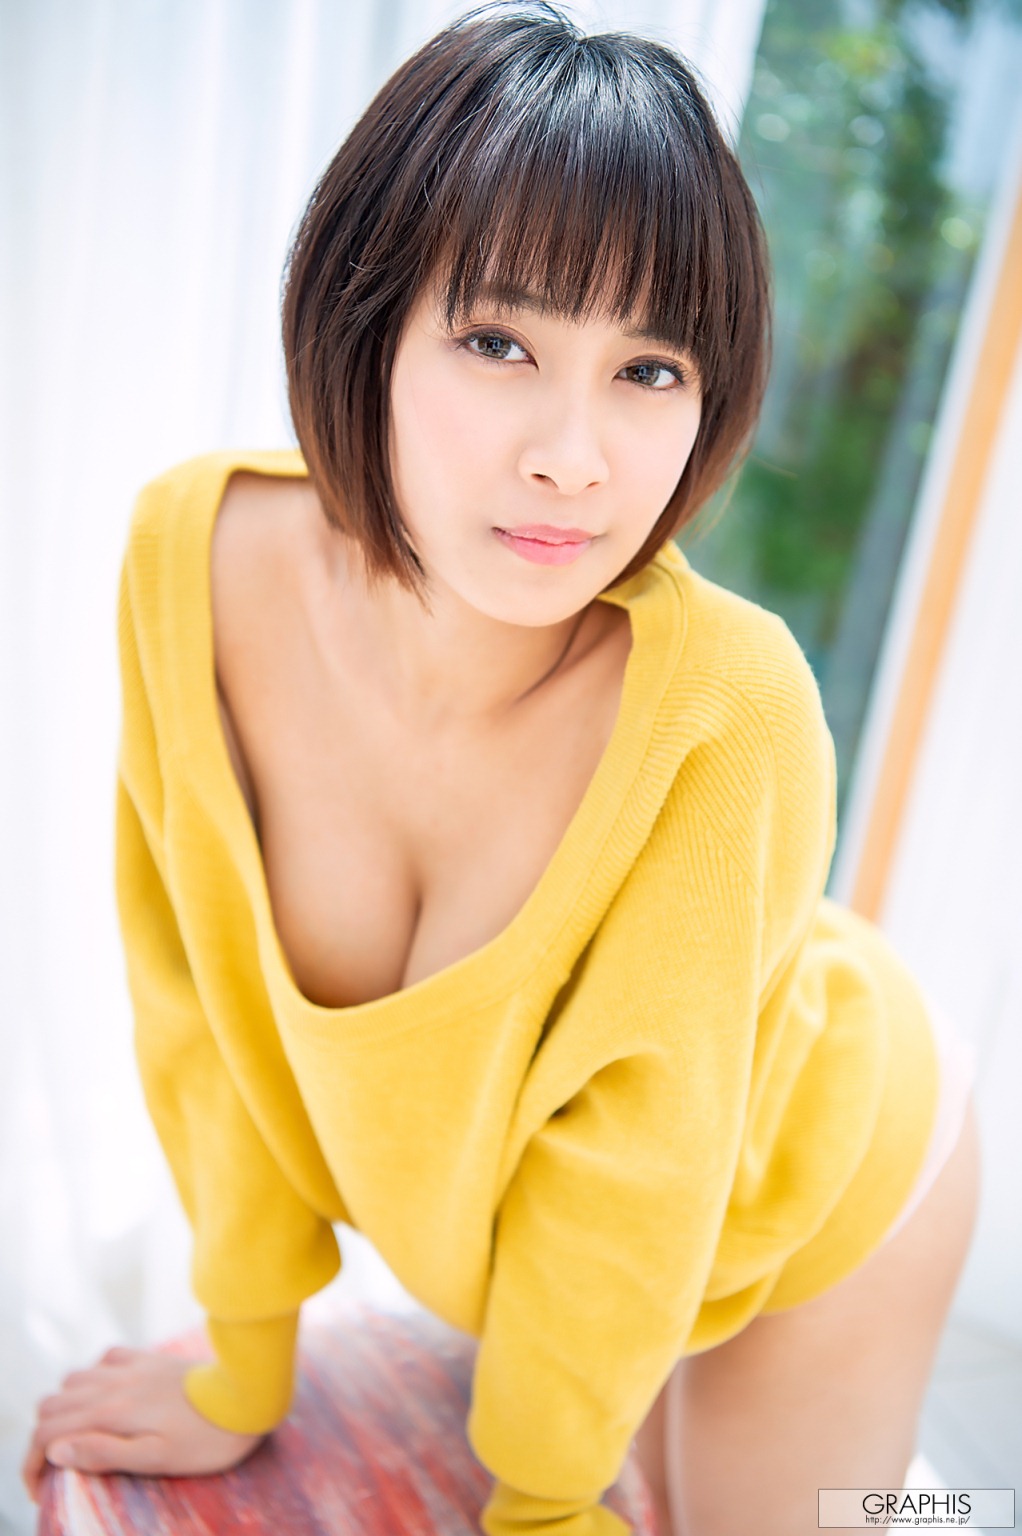 Rika Aimi 逢見リカ, [Graphis] Gals 『 First Gravure 』 Set.02 [20P] - 貼圖 - 清涼寫真 -